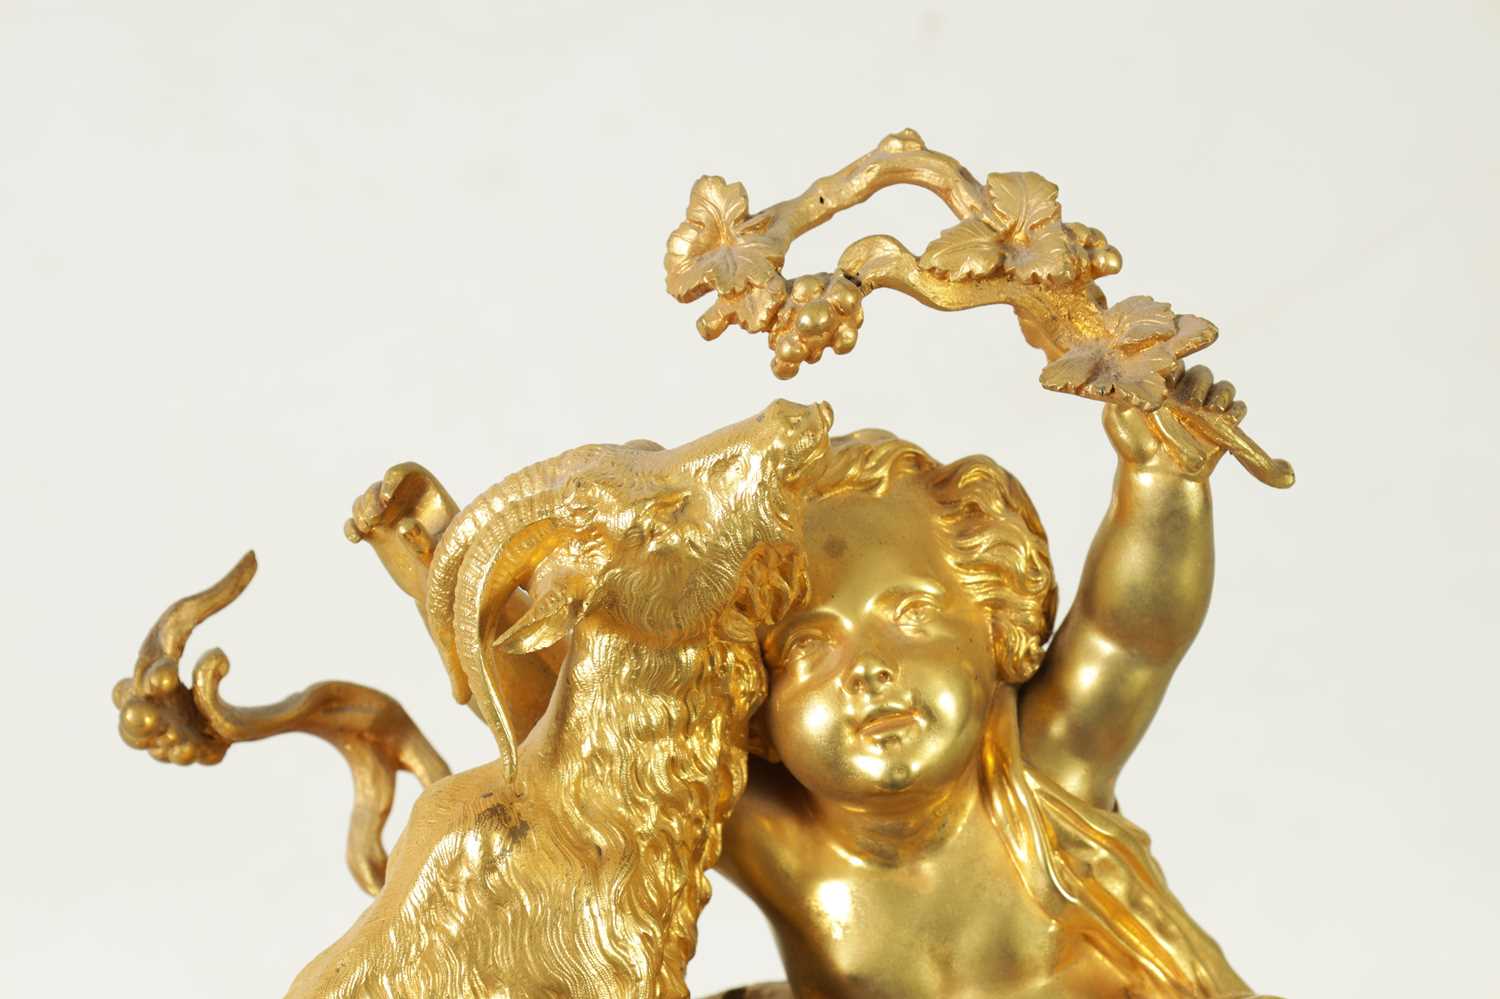 CHARLES OUDIN, A PARIS. A LATE 19TH CENTURY FRENCH ORMOLU AND PORCELAIN PANELLED MANTEL CLOCK - Image 3 of 11